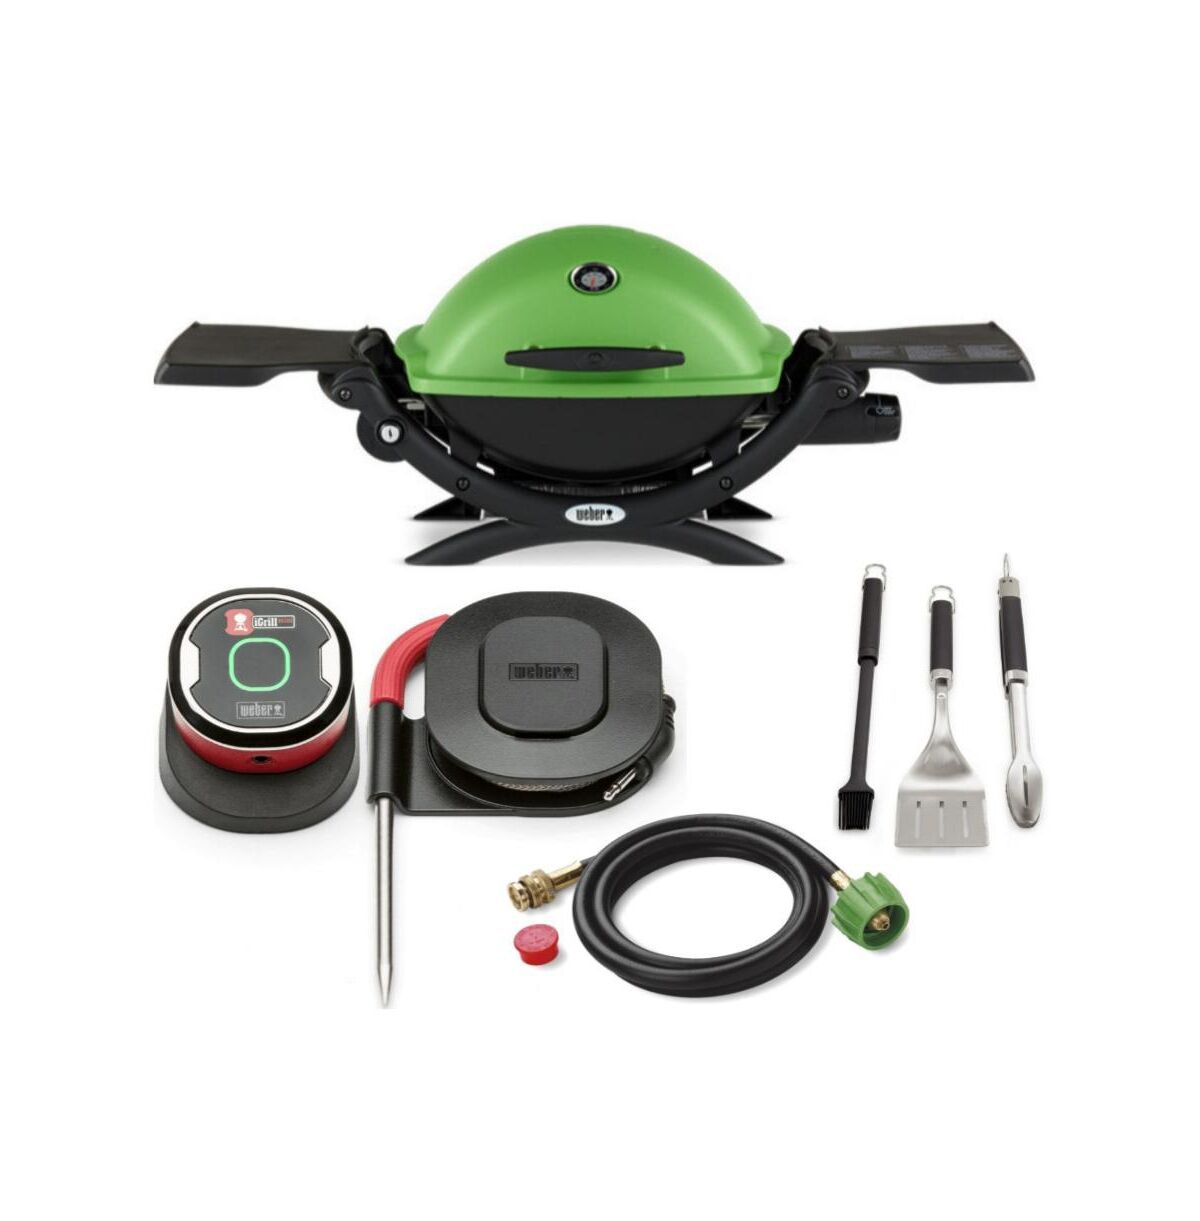 Weber Q 1200 Gas Grill (Green) With Adapter Hose, Thermometer And Tool - Green